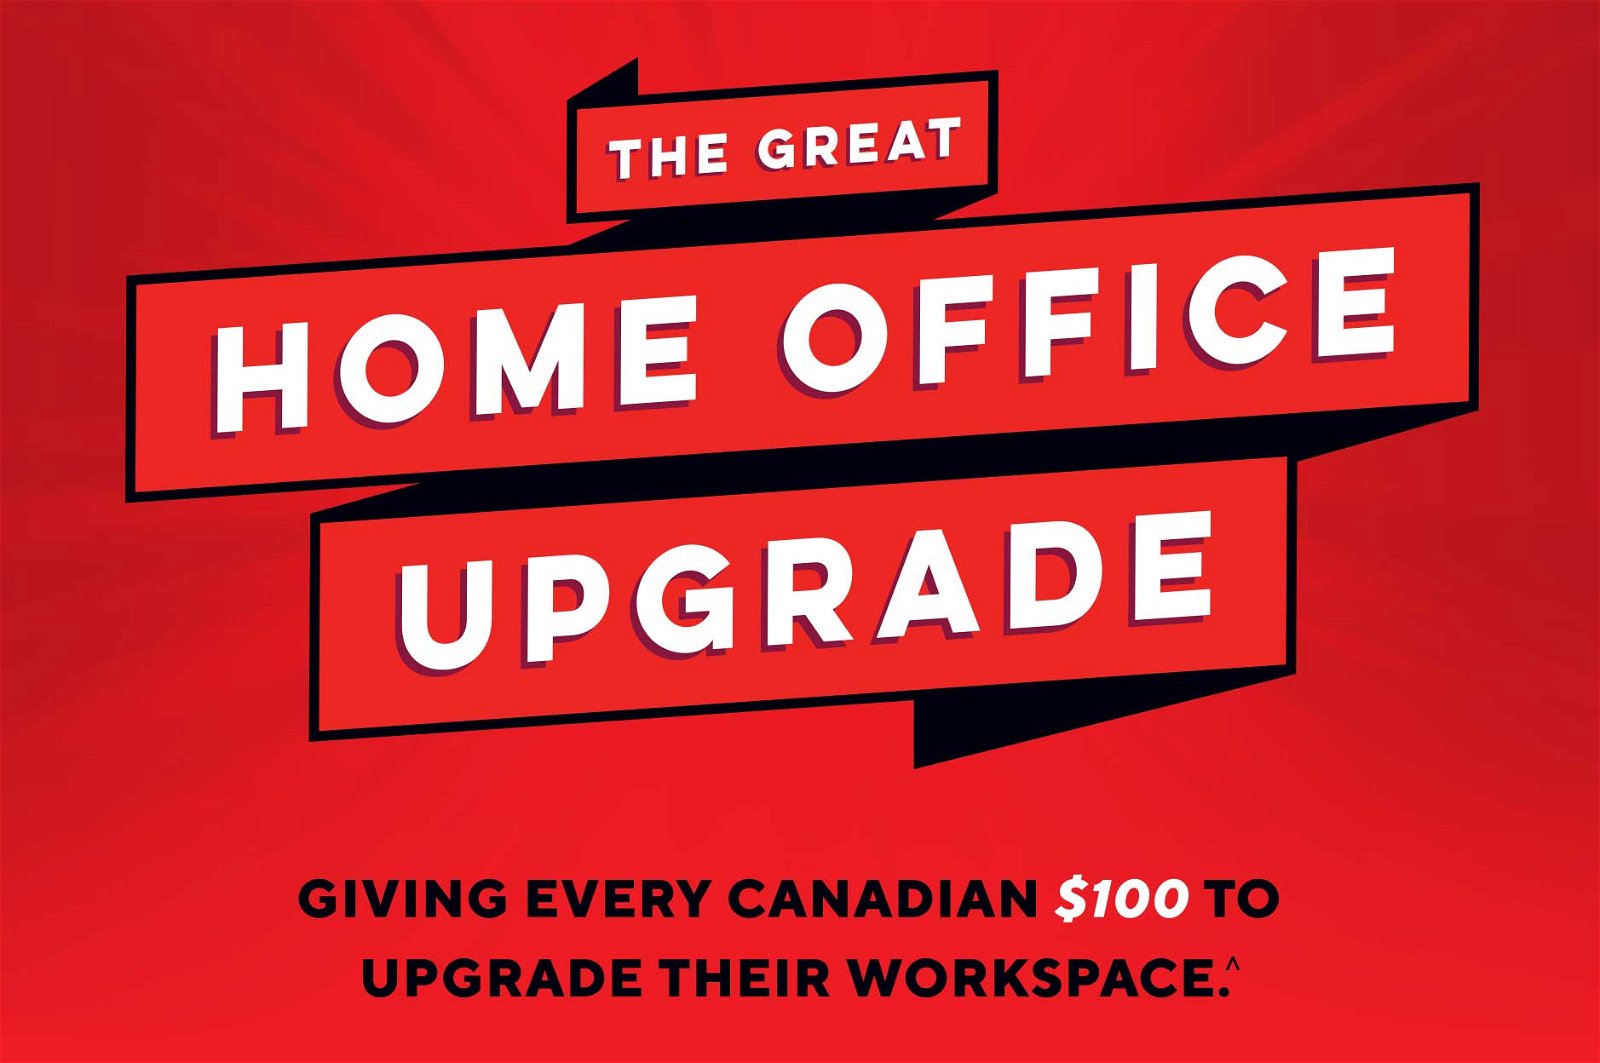 The Great Home Office Upgrade. Giving every Canadian $100 to upgrade their workspace.^